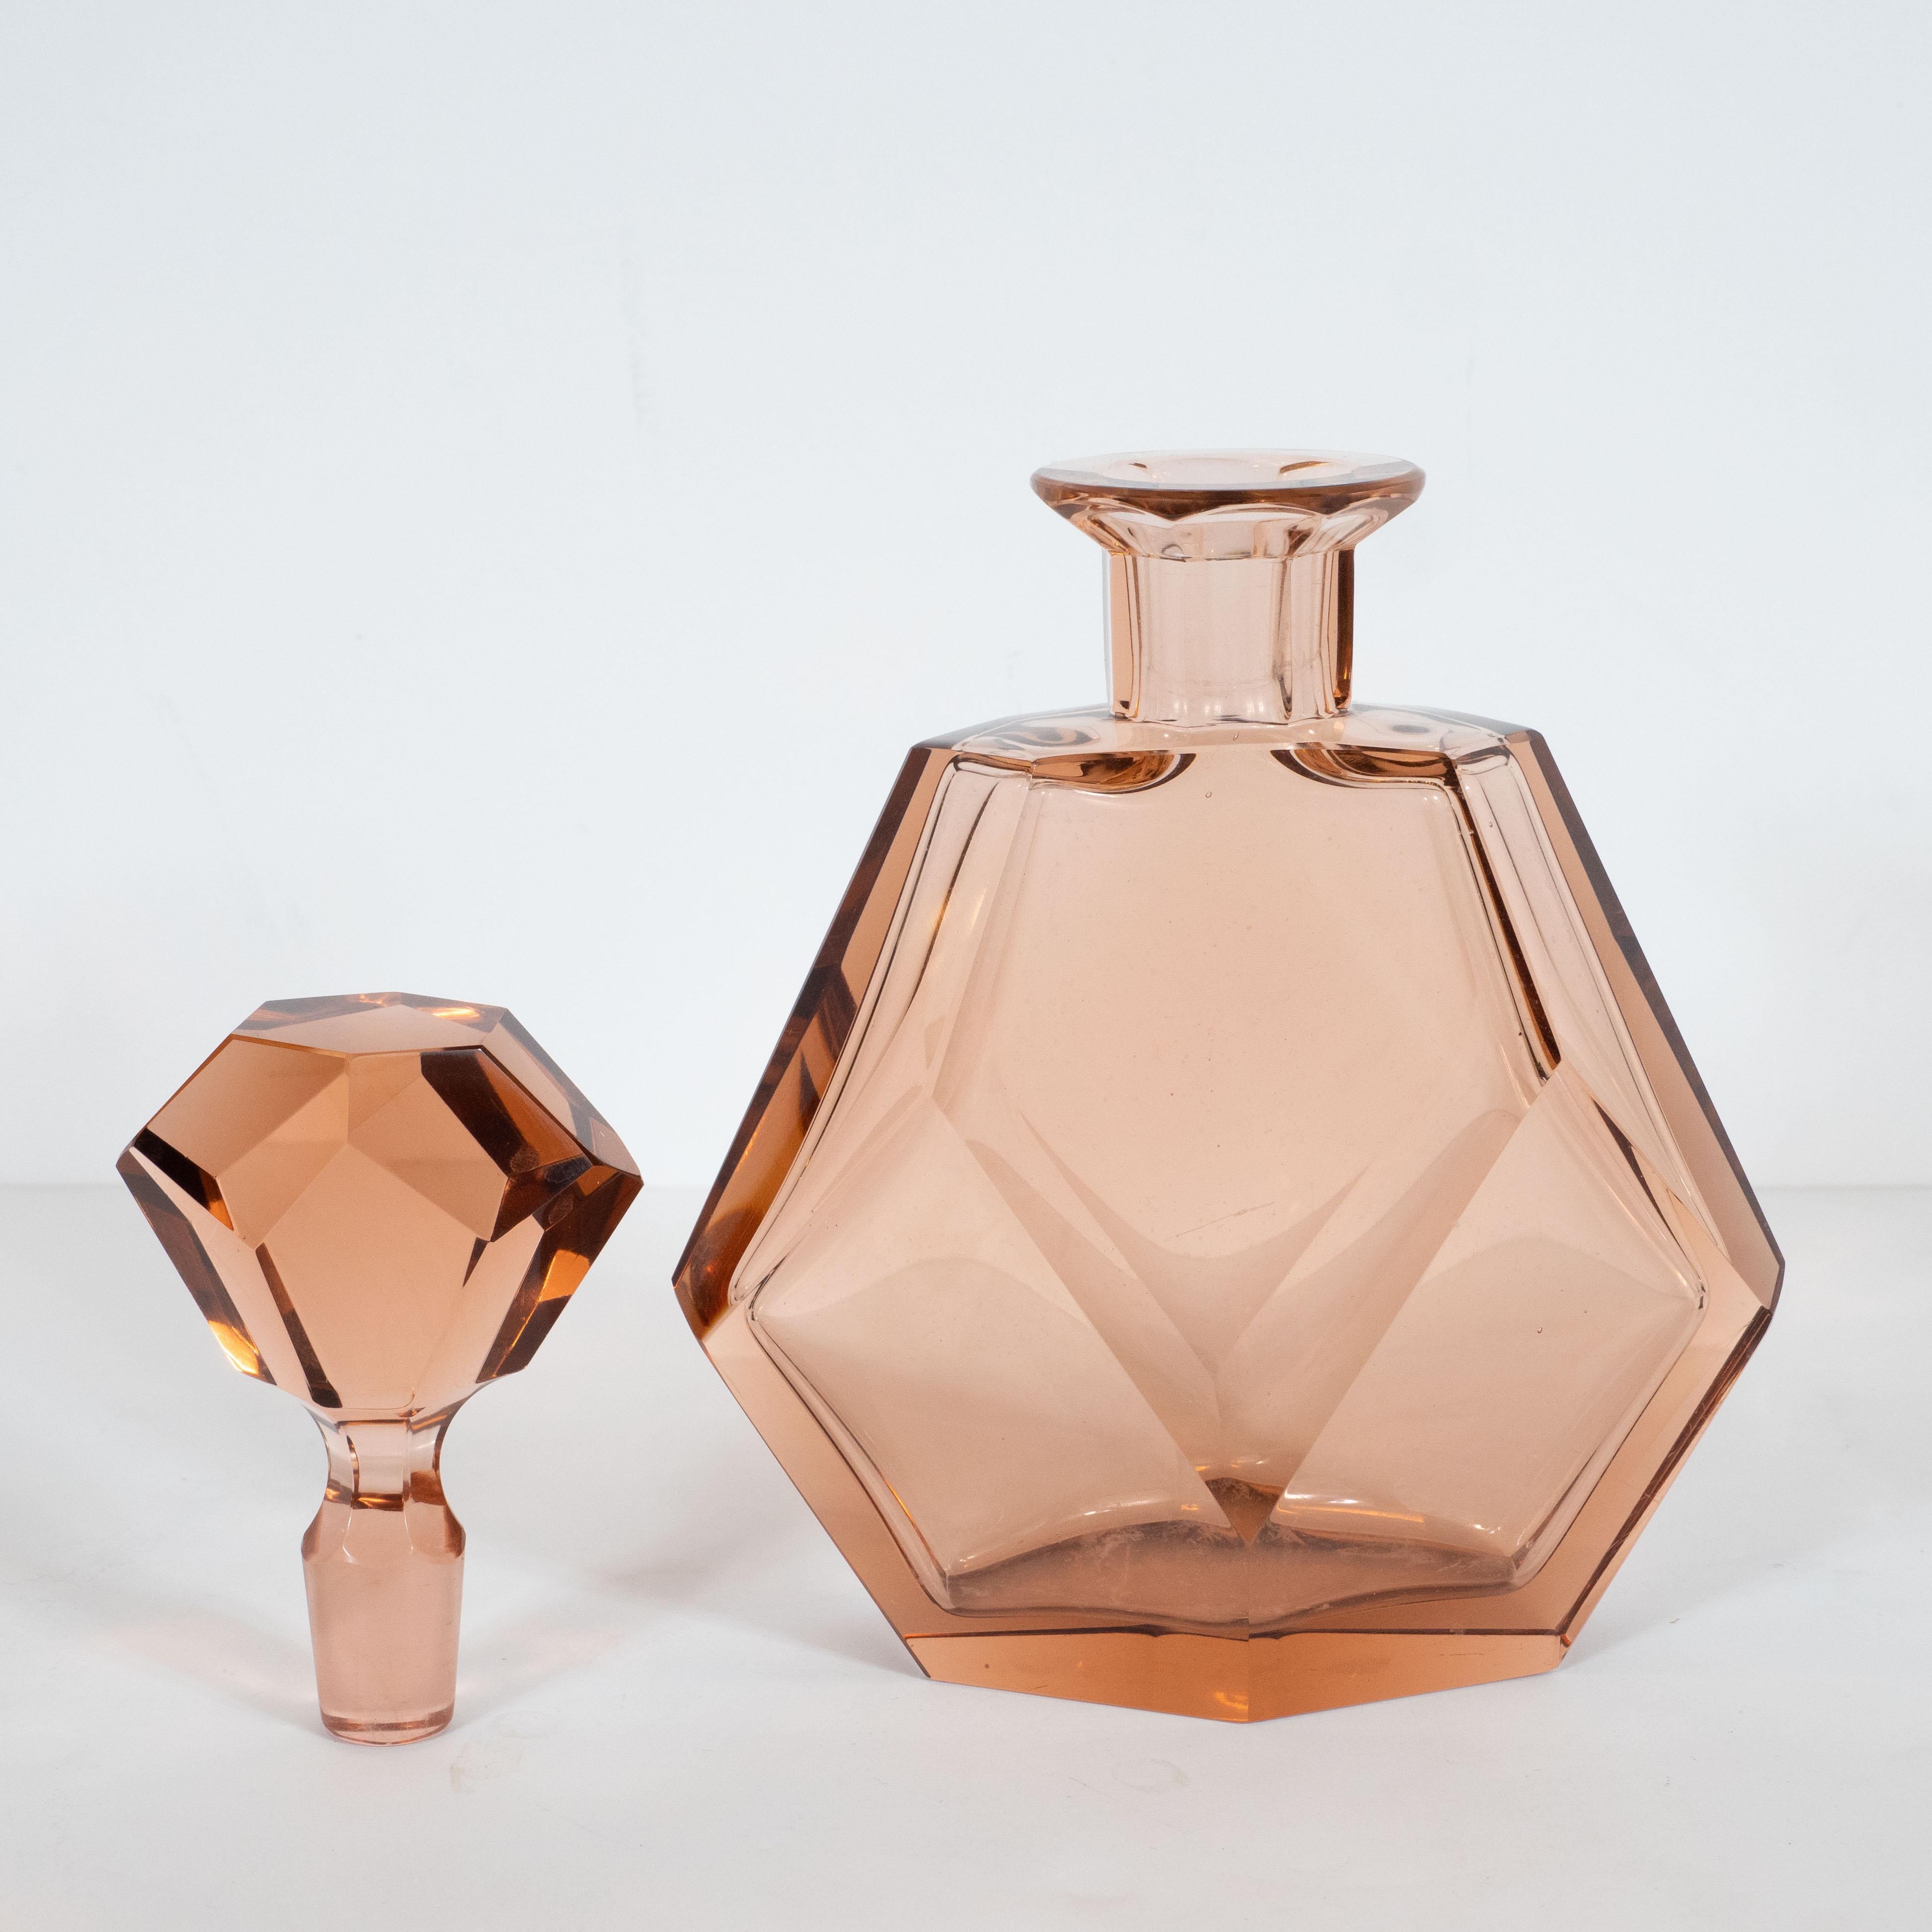 Art Deco Machine Age Faceted Czech Glass Decanter in a Smoked Rose Hue 1